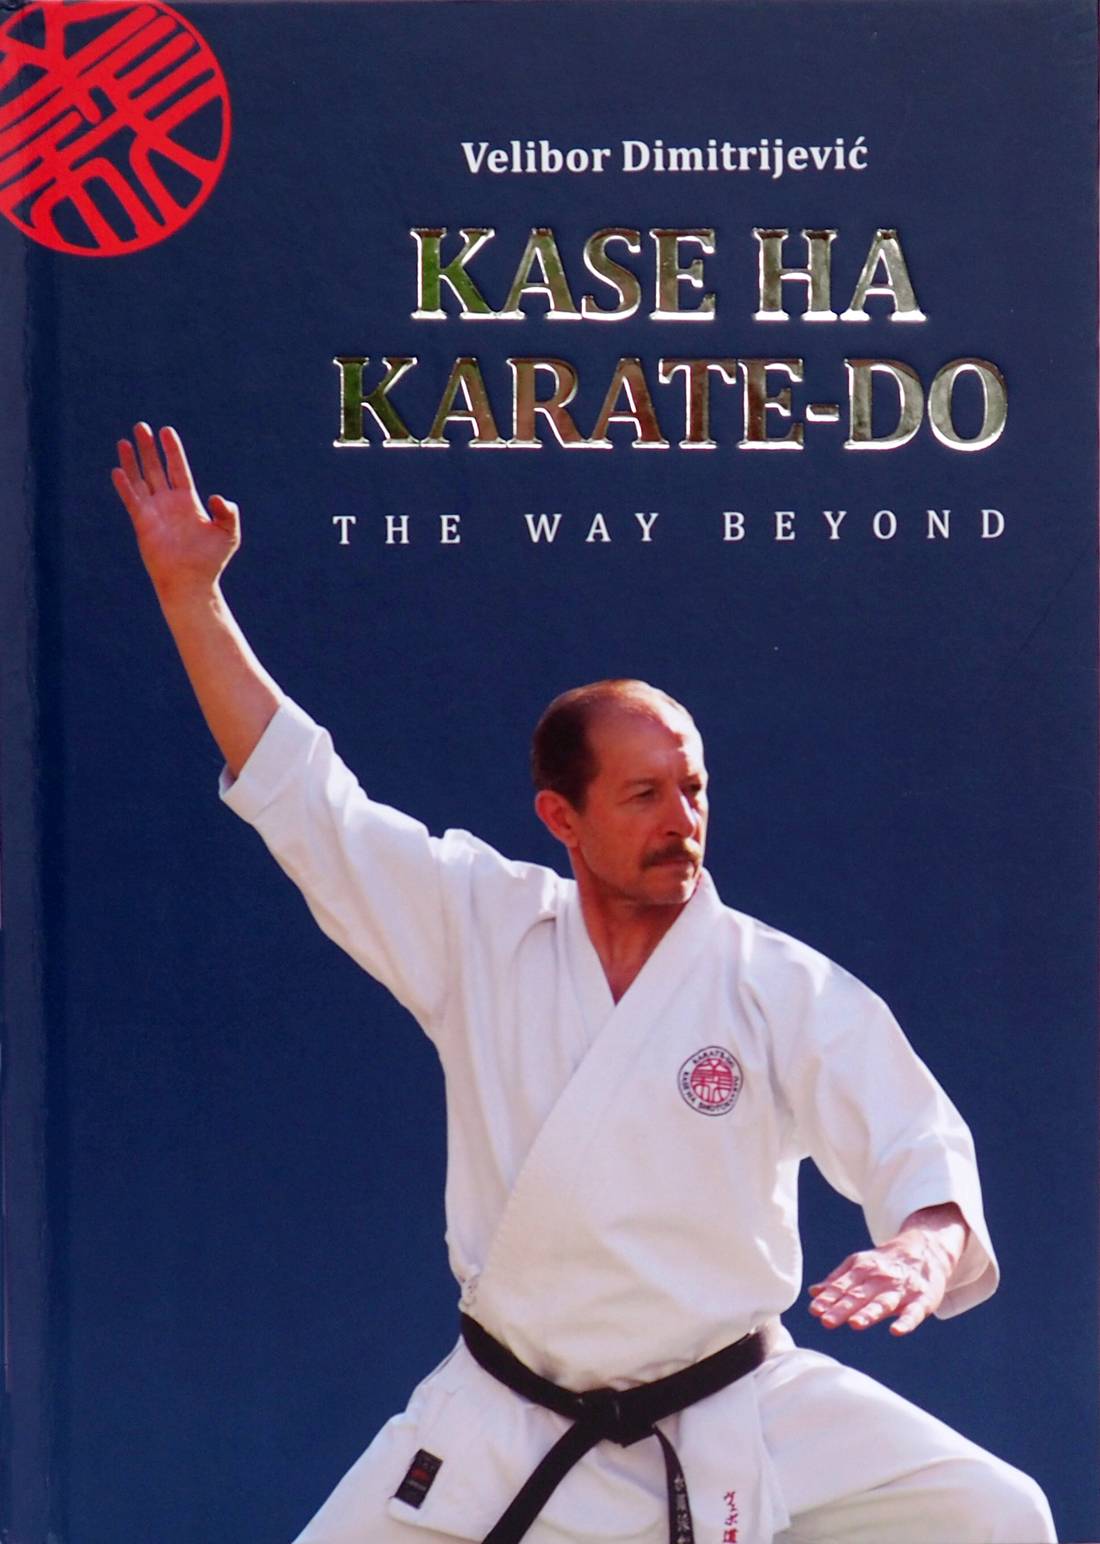 Karate Training Book Pdf - ourtree